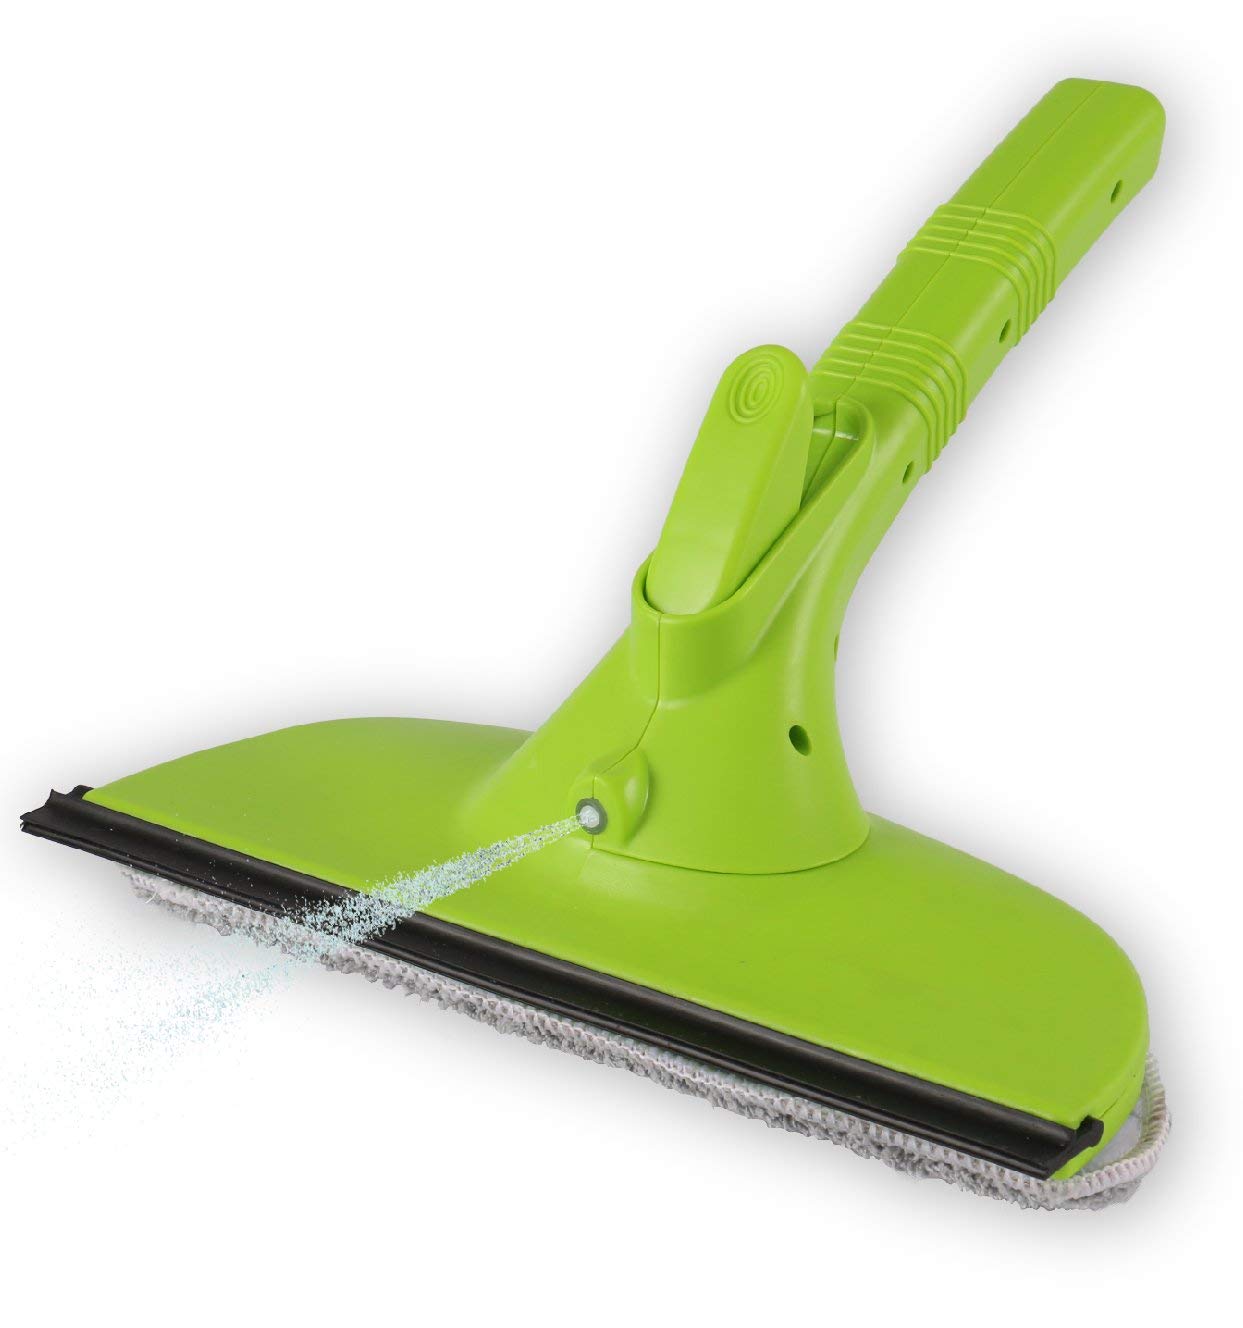 Squeegee shine window cleaner concentrate